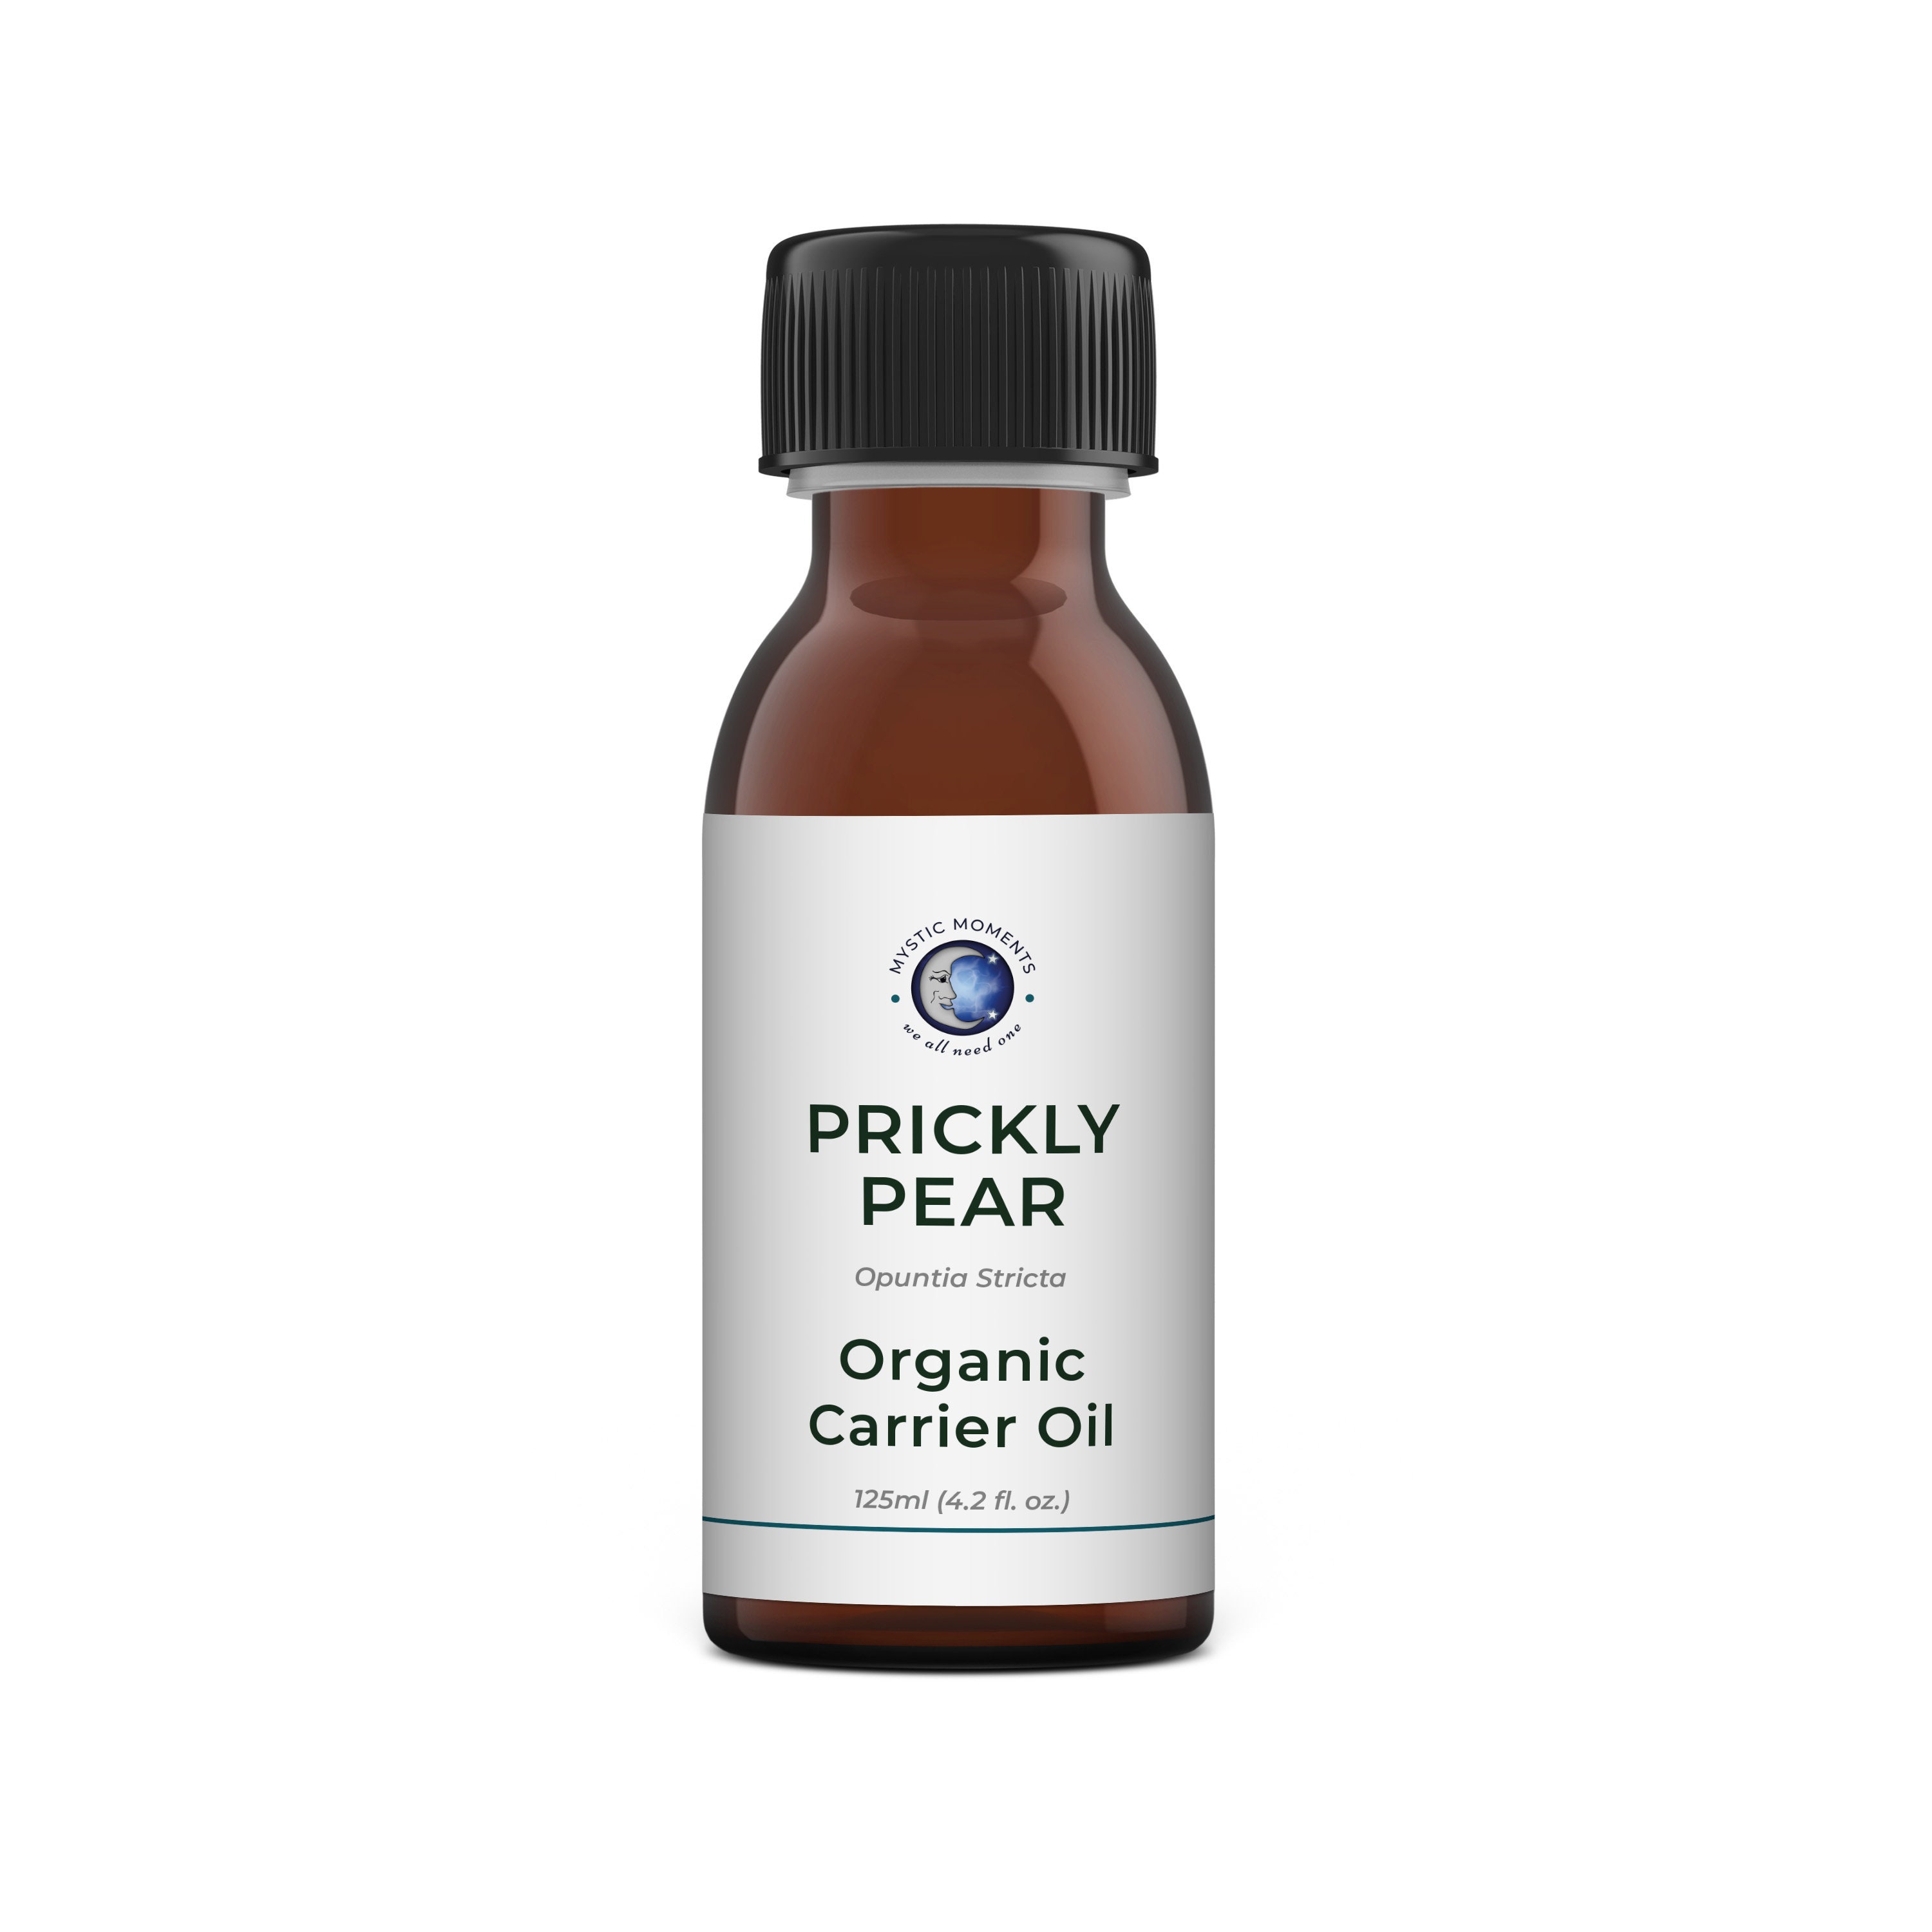 Prickly Pear Seed Oil, Organic, Cold Pressed, and Unrefined